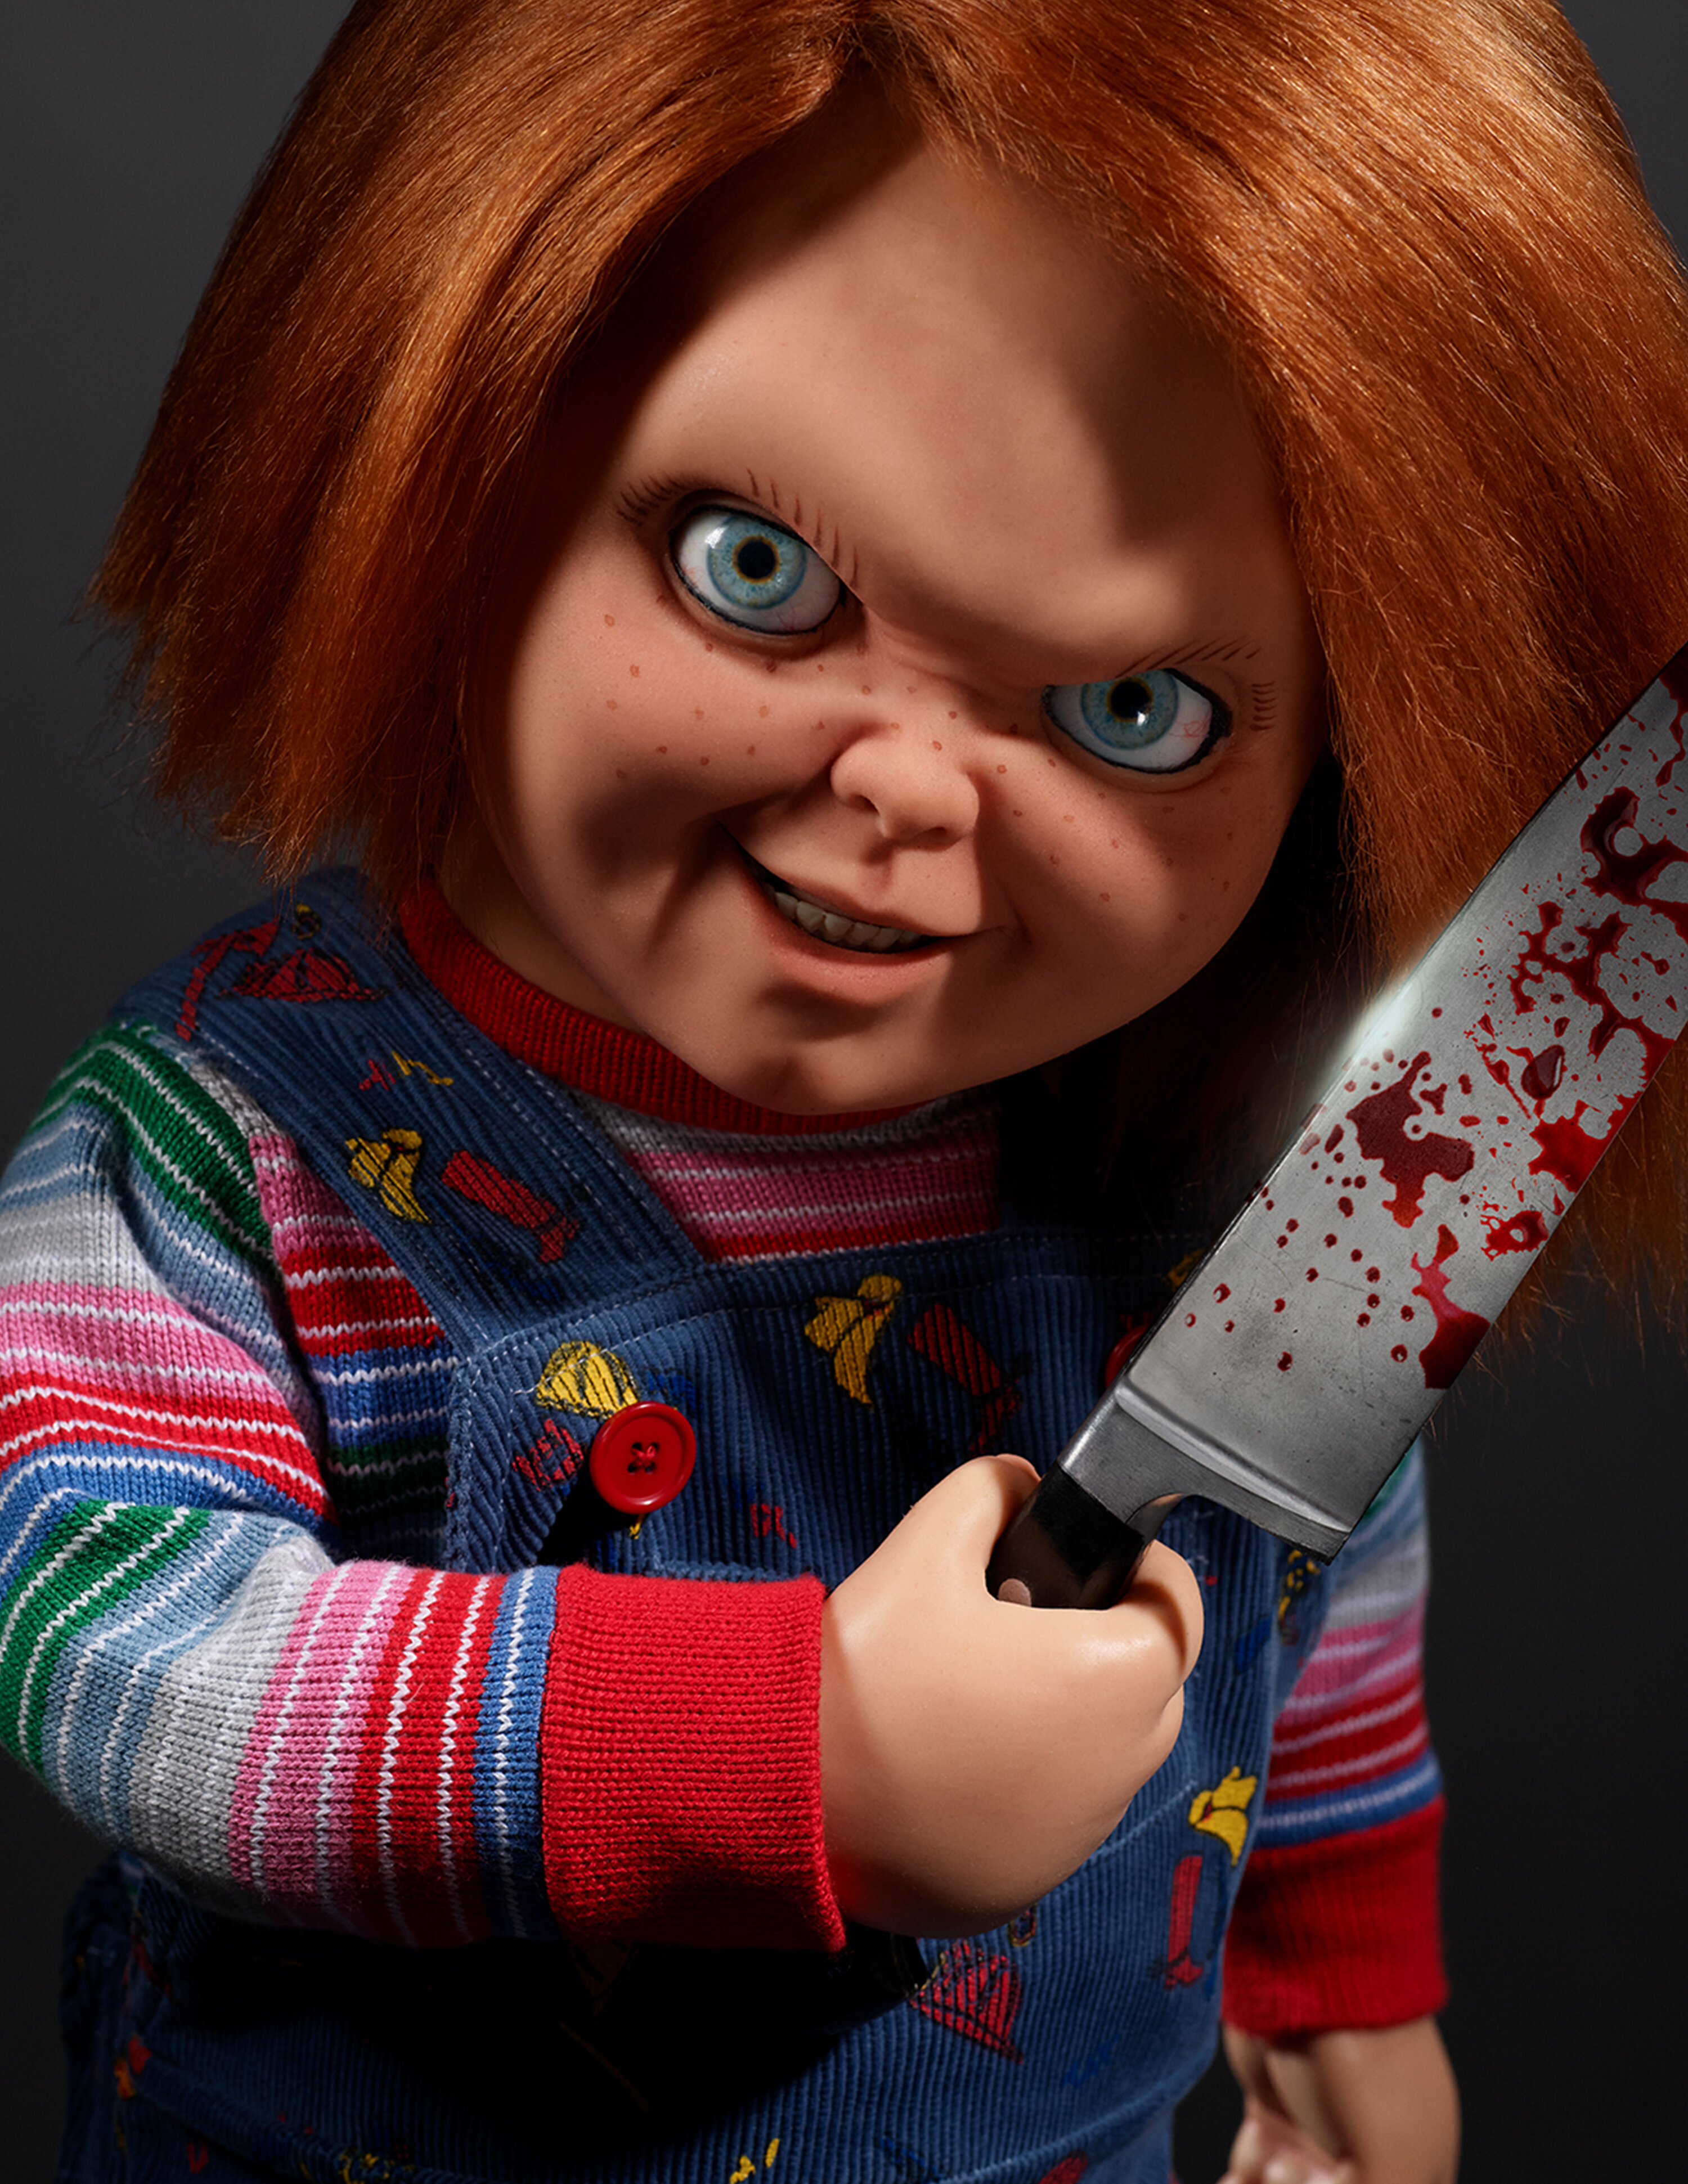 Neighbors Freaked By Creepy Chucky Doll Discover Real-Life Childs Play HuffPost Weird News picture